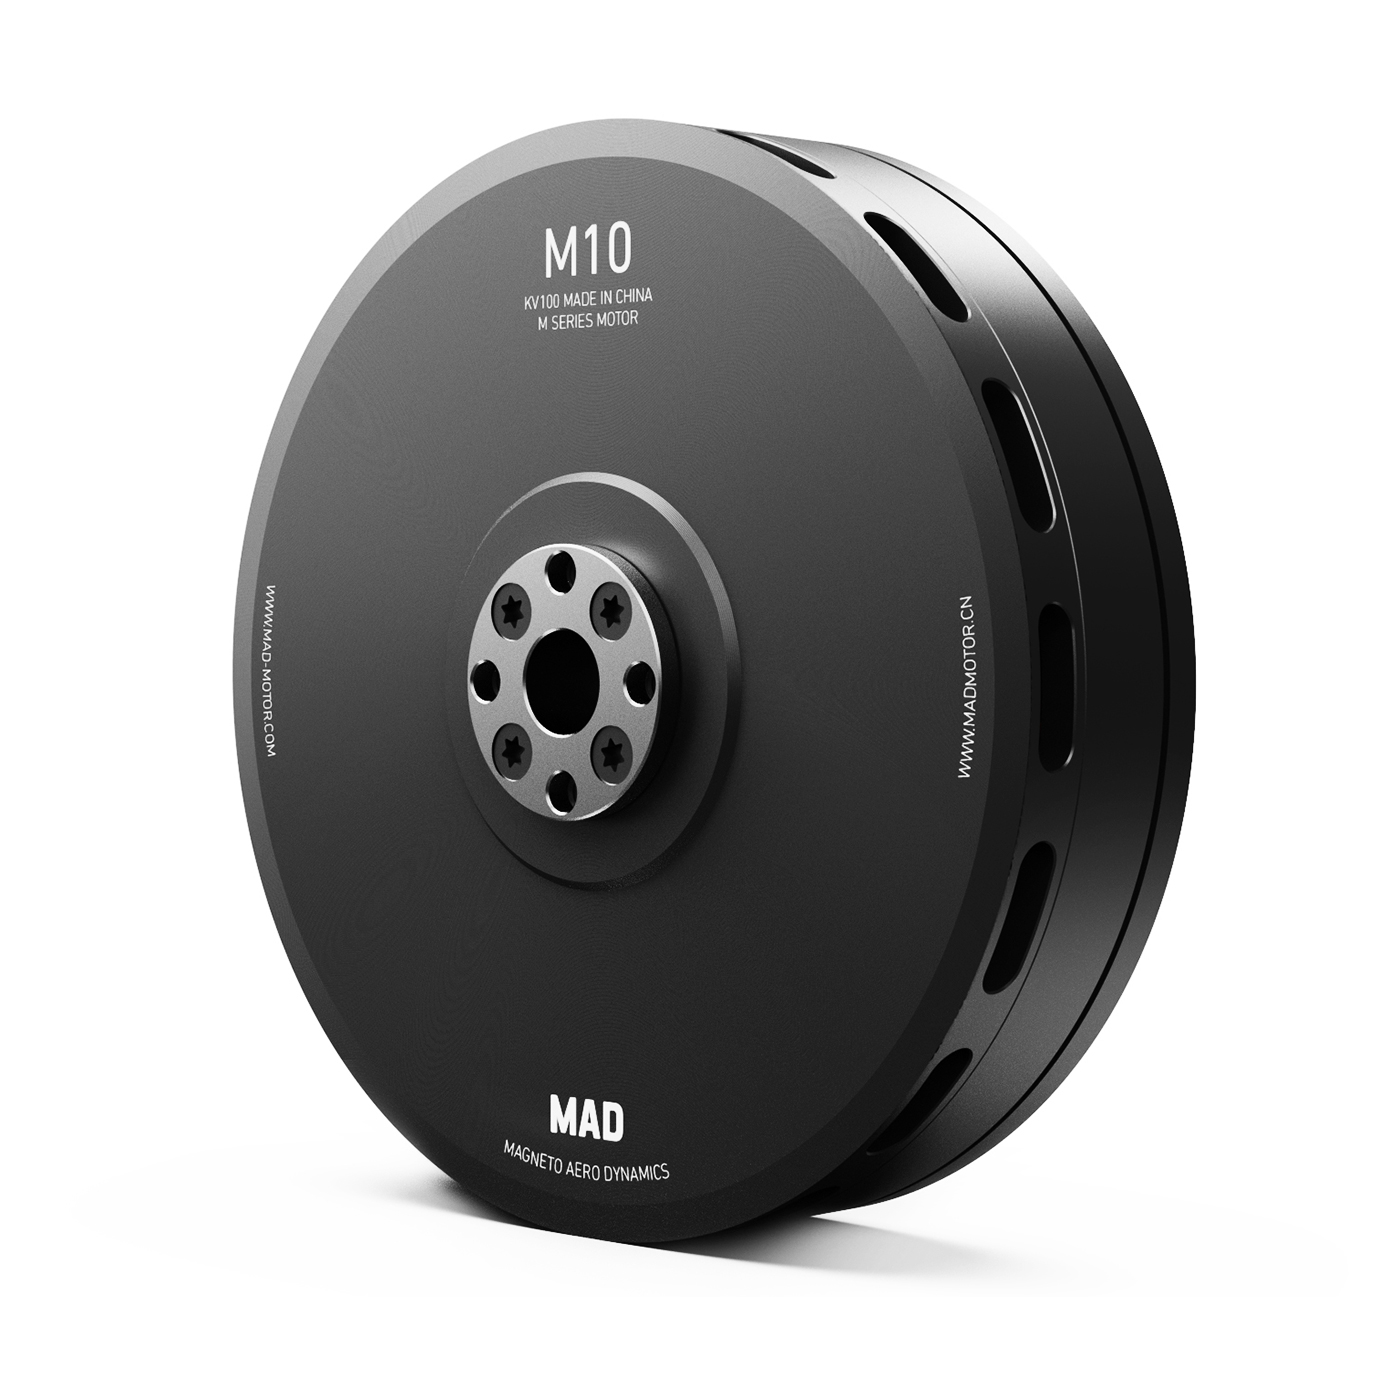 MAD M10 IPE V2.0 Angular Contact Ball Bearing Version brushless motor for the long flight time multirotor hexacopter octocopte for the long flight time tethered drone